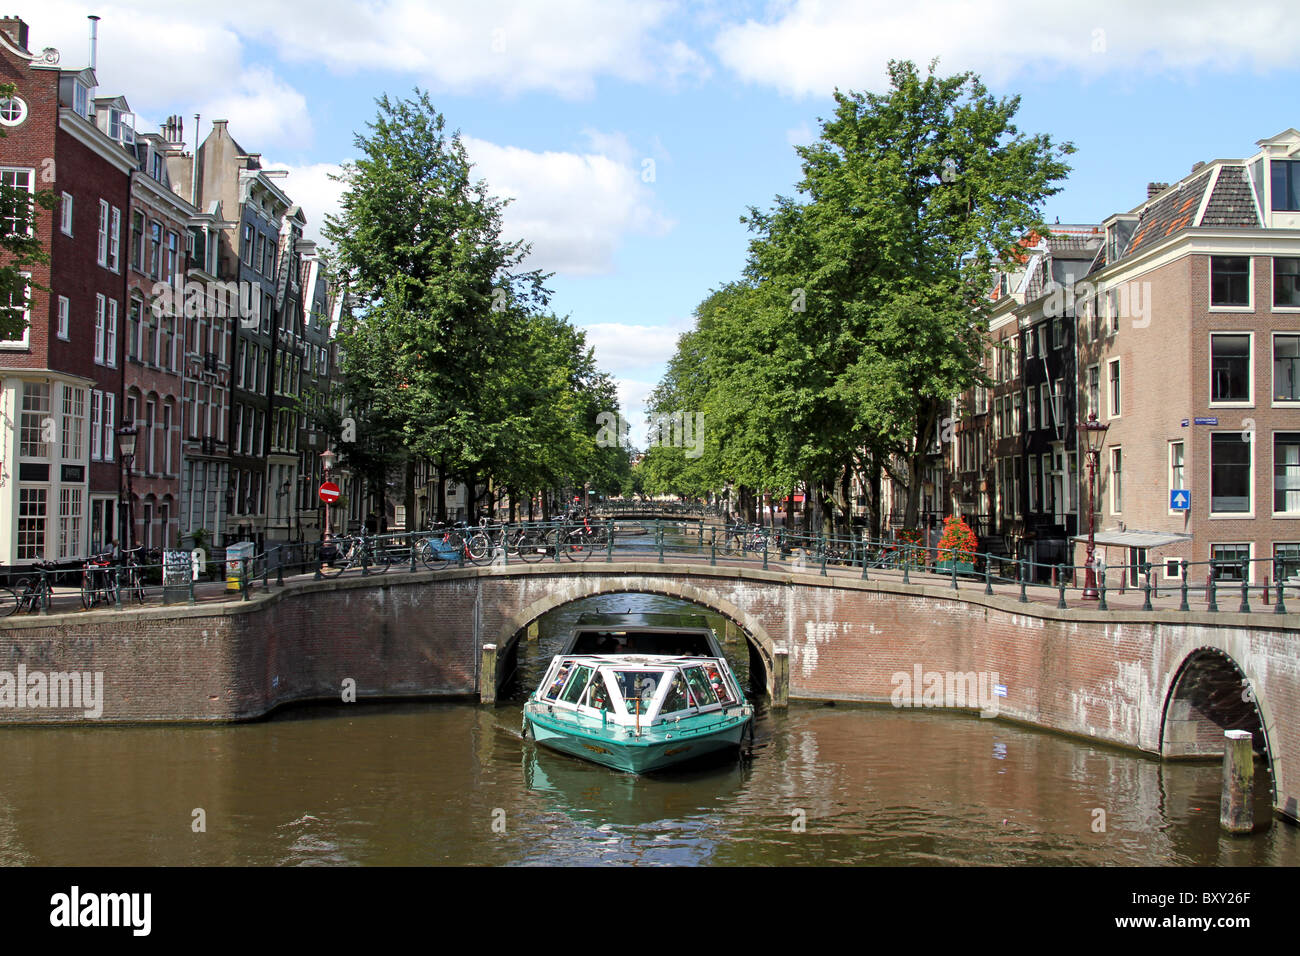 Bridge and tourist boat on the canal at Leidse Gracht in Amsterdam, Holland Stock Photo